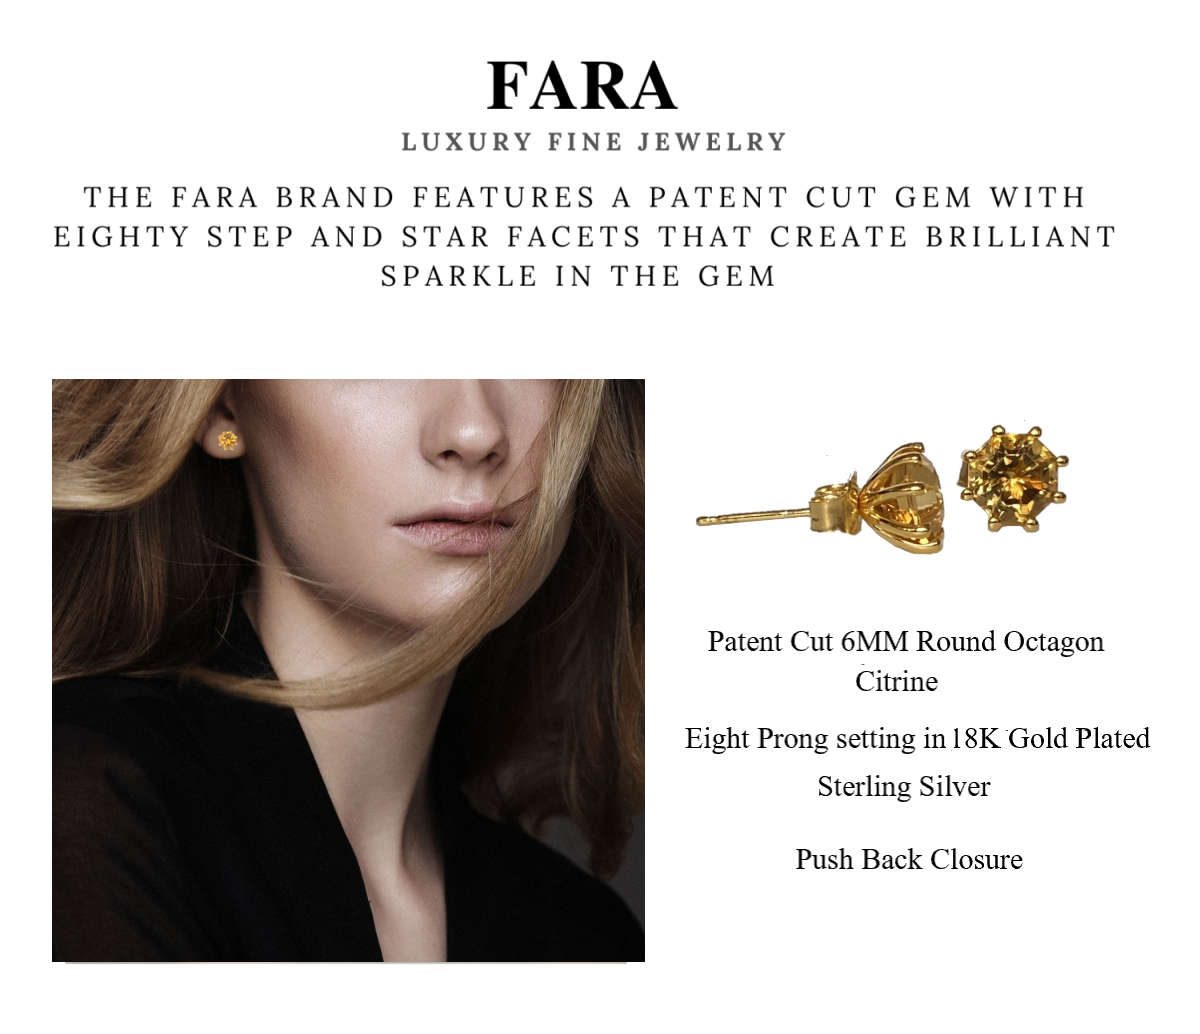 Classic Solitaire Citrine FARA Cut Stud Earring, 18K Gold Plated Sterling Silver